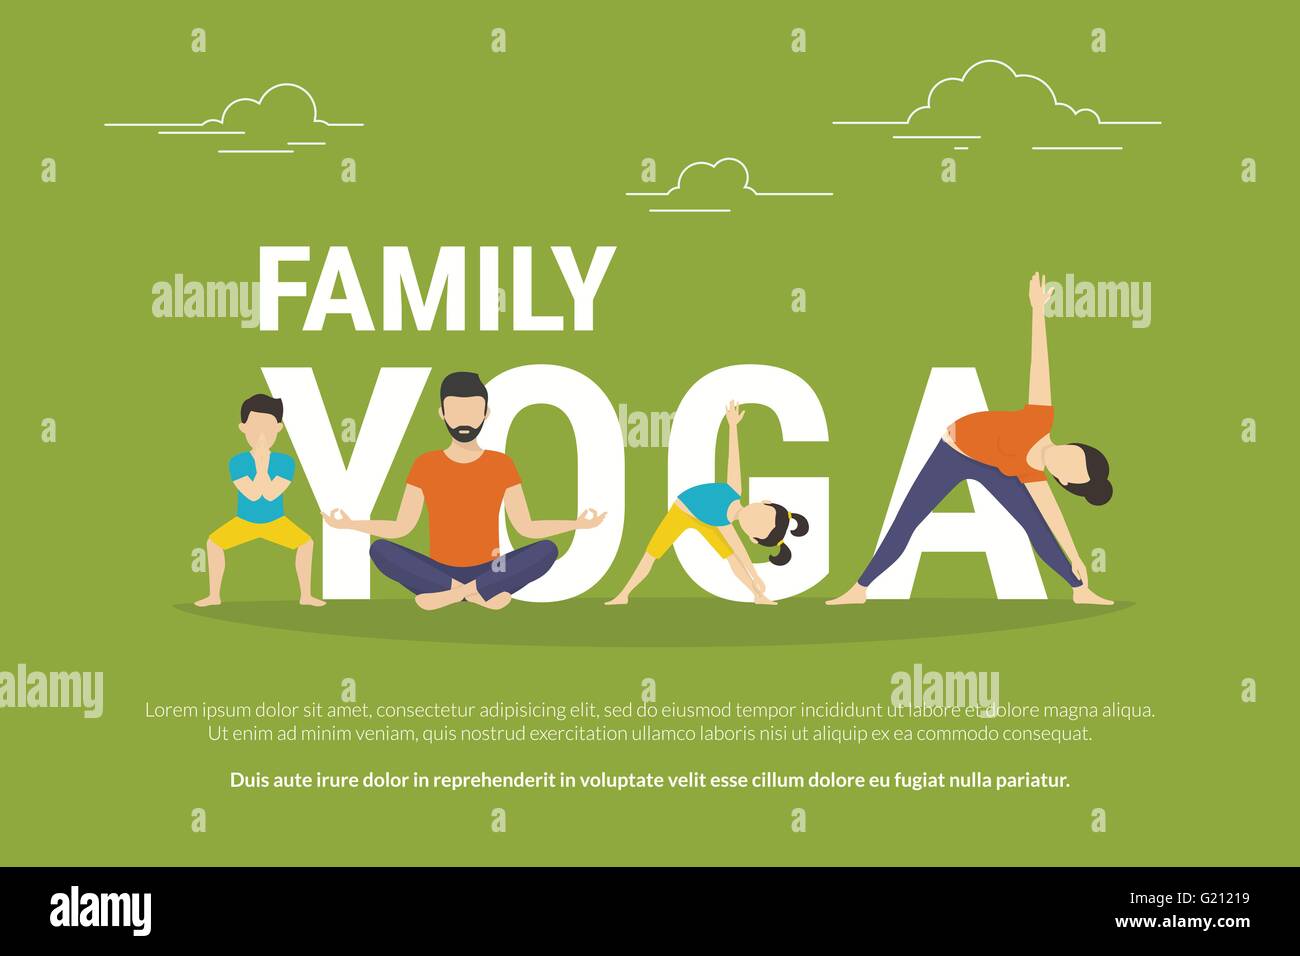 Concept illustration of family with kids doing yoga Stock Vector